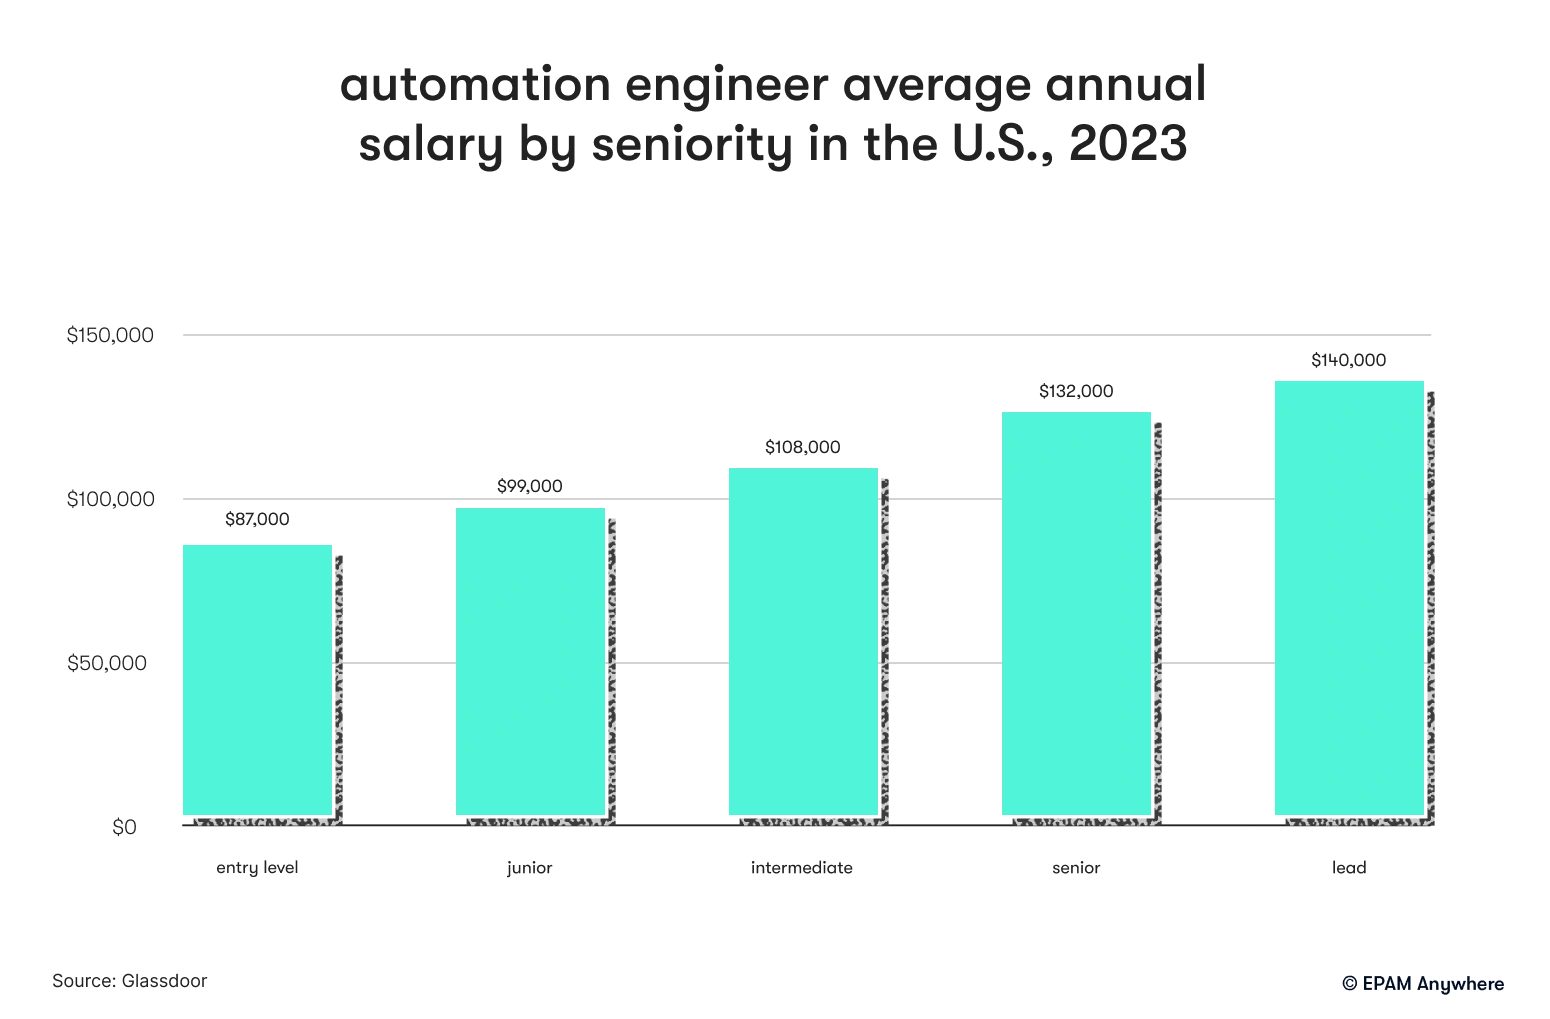 automation engineer average annual salary by seniority in the U.S., 2023